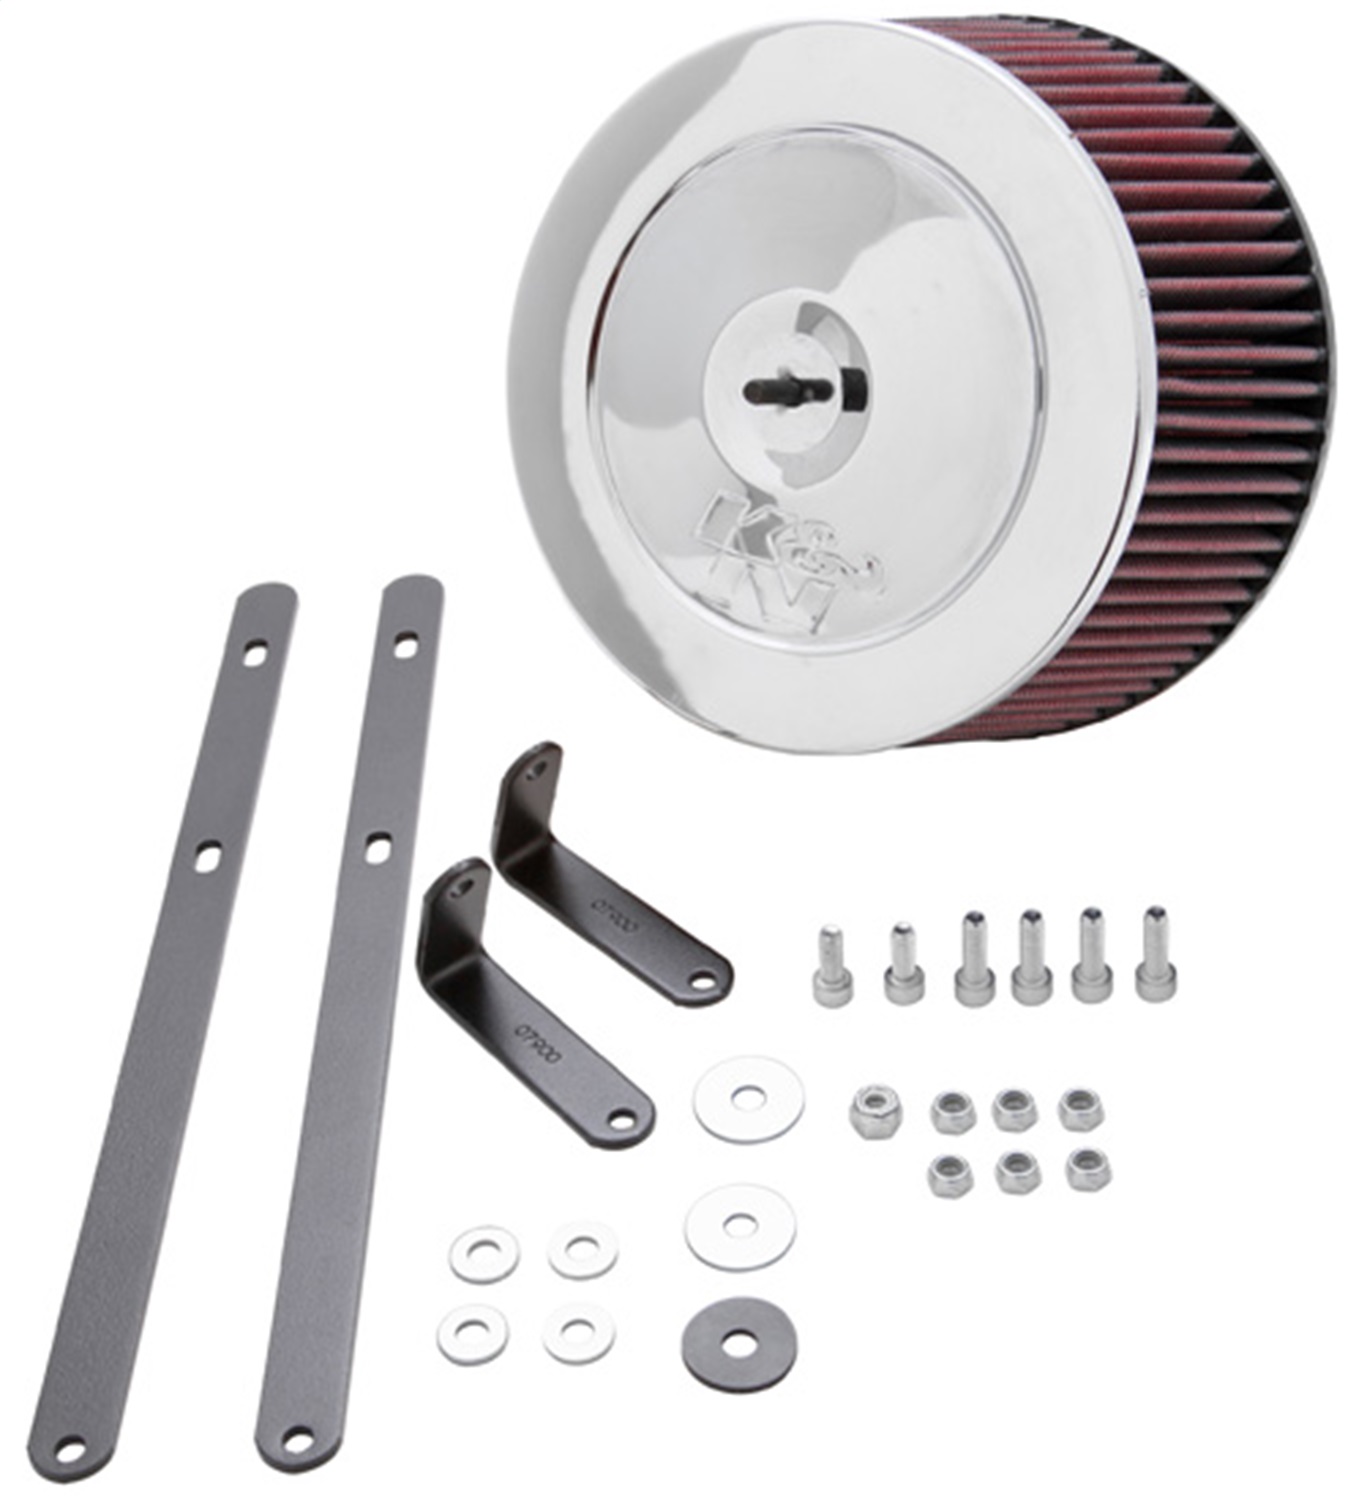 K&N Filters K&N Filters 57-6001 57i Series Induction Kit Fits 90-93 300ZX